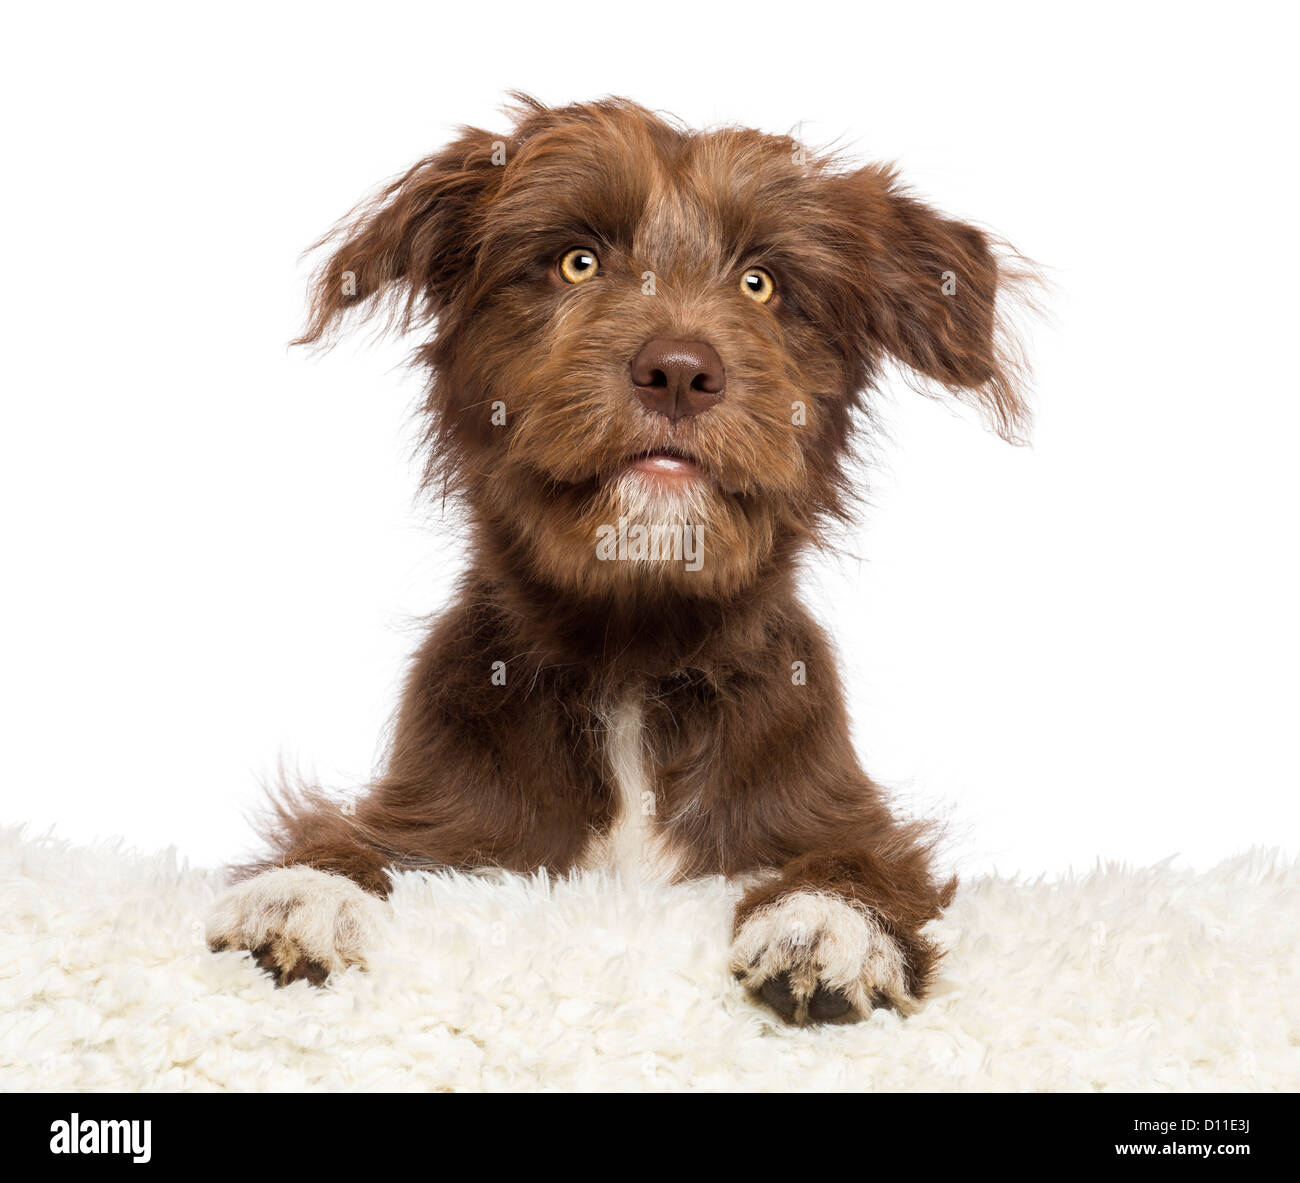 Crossbreed dog lying on white fur and looking away against white background Stock Photo